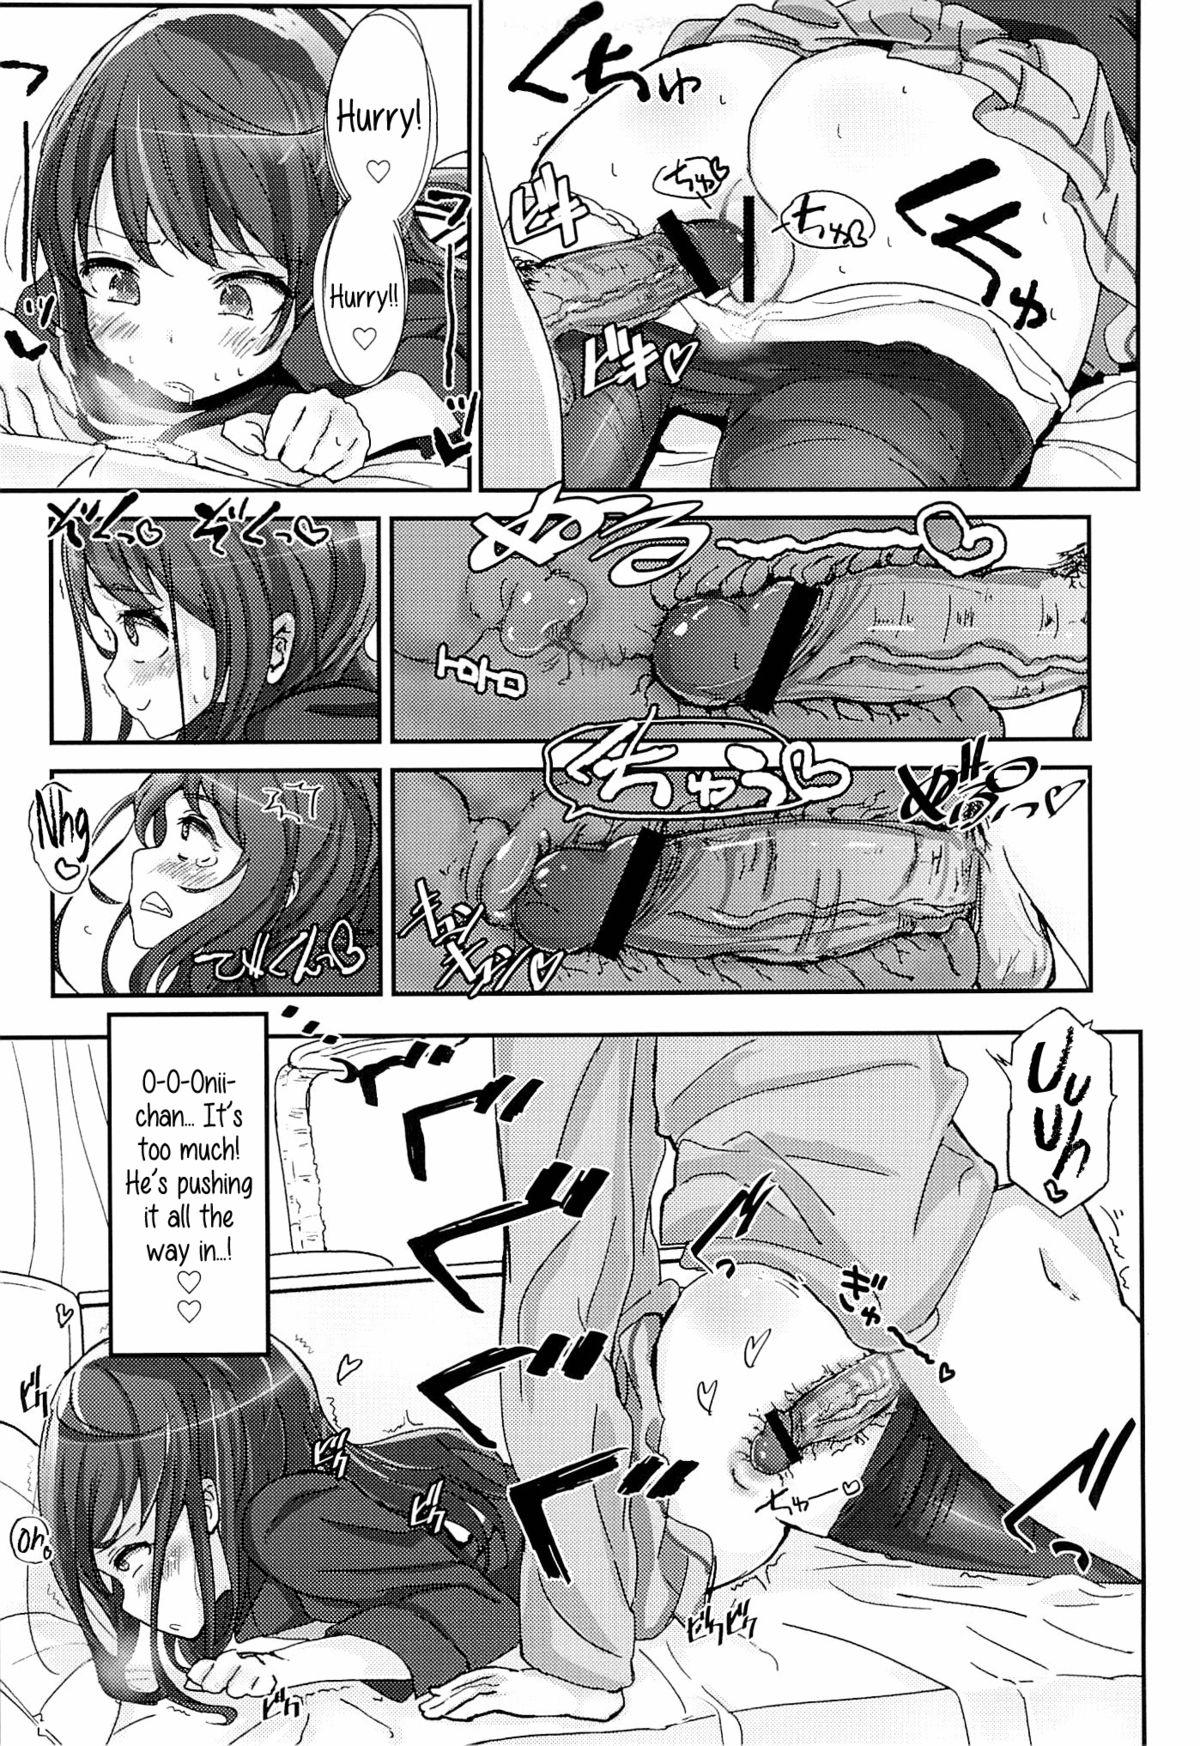 Pmv Shikyuukou no Kanata, Onii chan no Hate | Beyond the mouth of the uterus lies Onii-chan’s demise Oil - Page 6